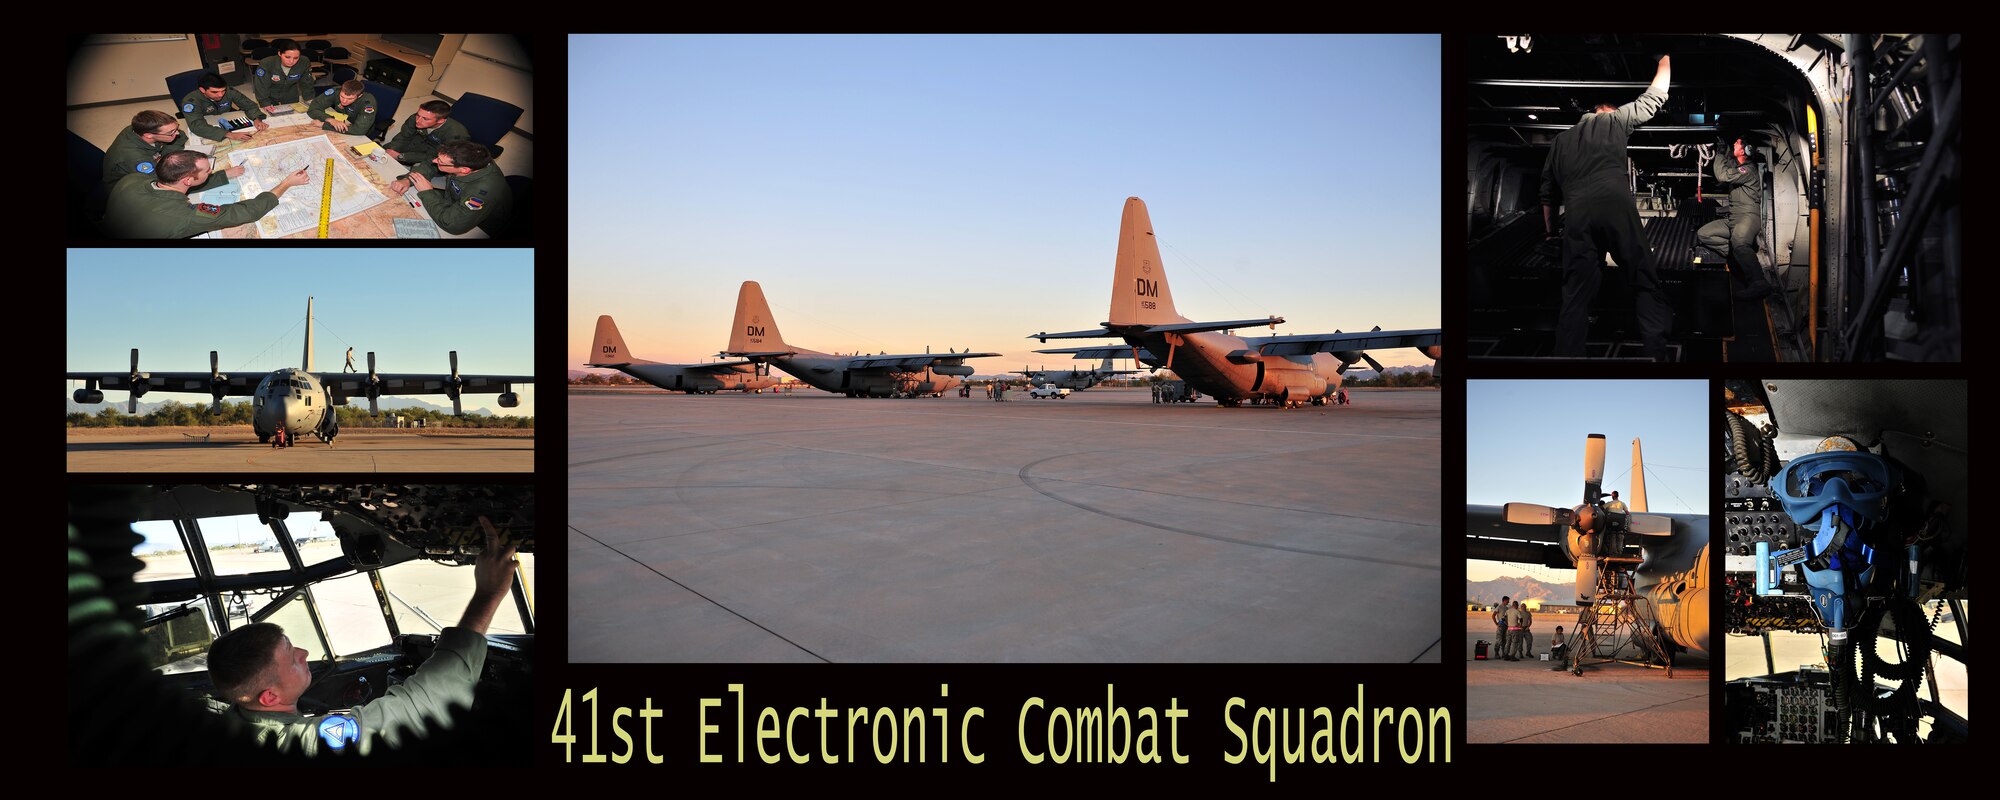 The unit's combat mission is to support tactical air, ground and naval operations by confusing the enemy's defenses and disrupting its command and control capabilities.